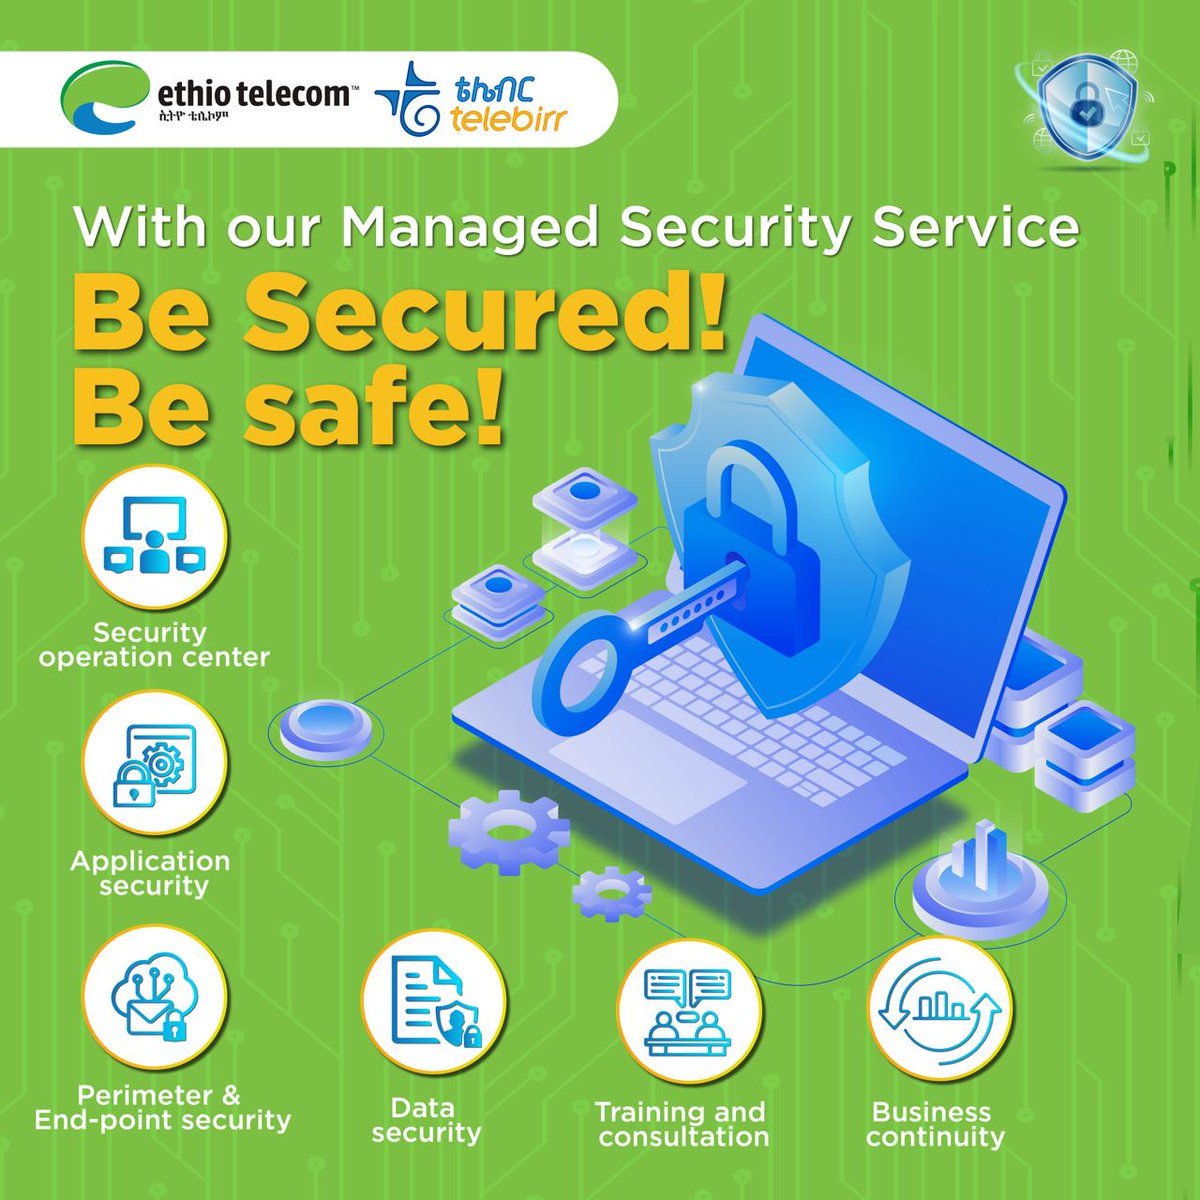 Our Managed Security Services provide a robust solution to effectively manage, monitor, detect, prevent, and respond to cyber threats. Stay ahead of the constantly changing cyber environment by using our services to protect your digital assets and infrastructure.